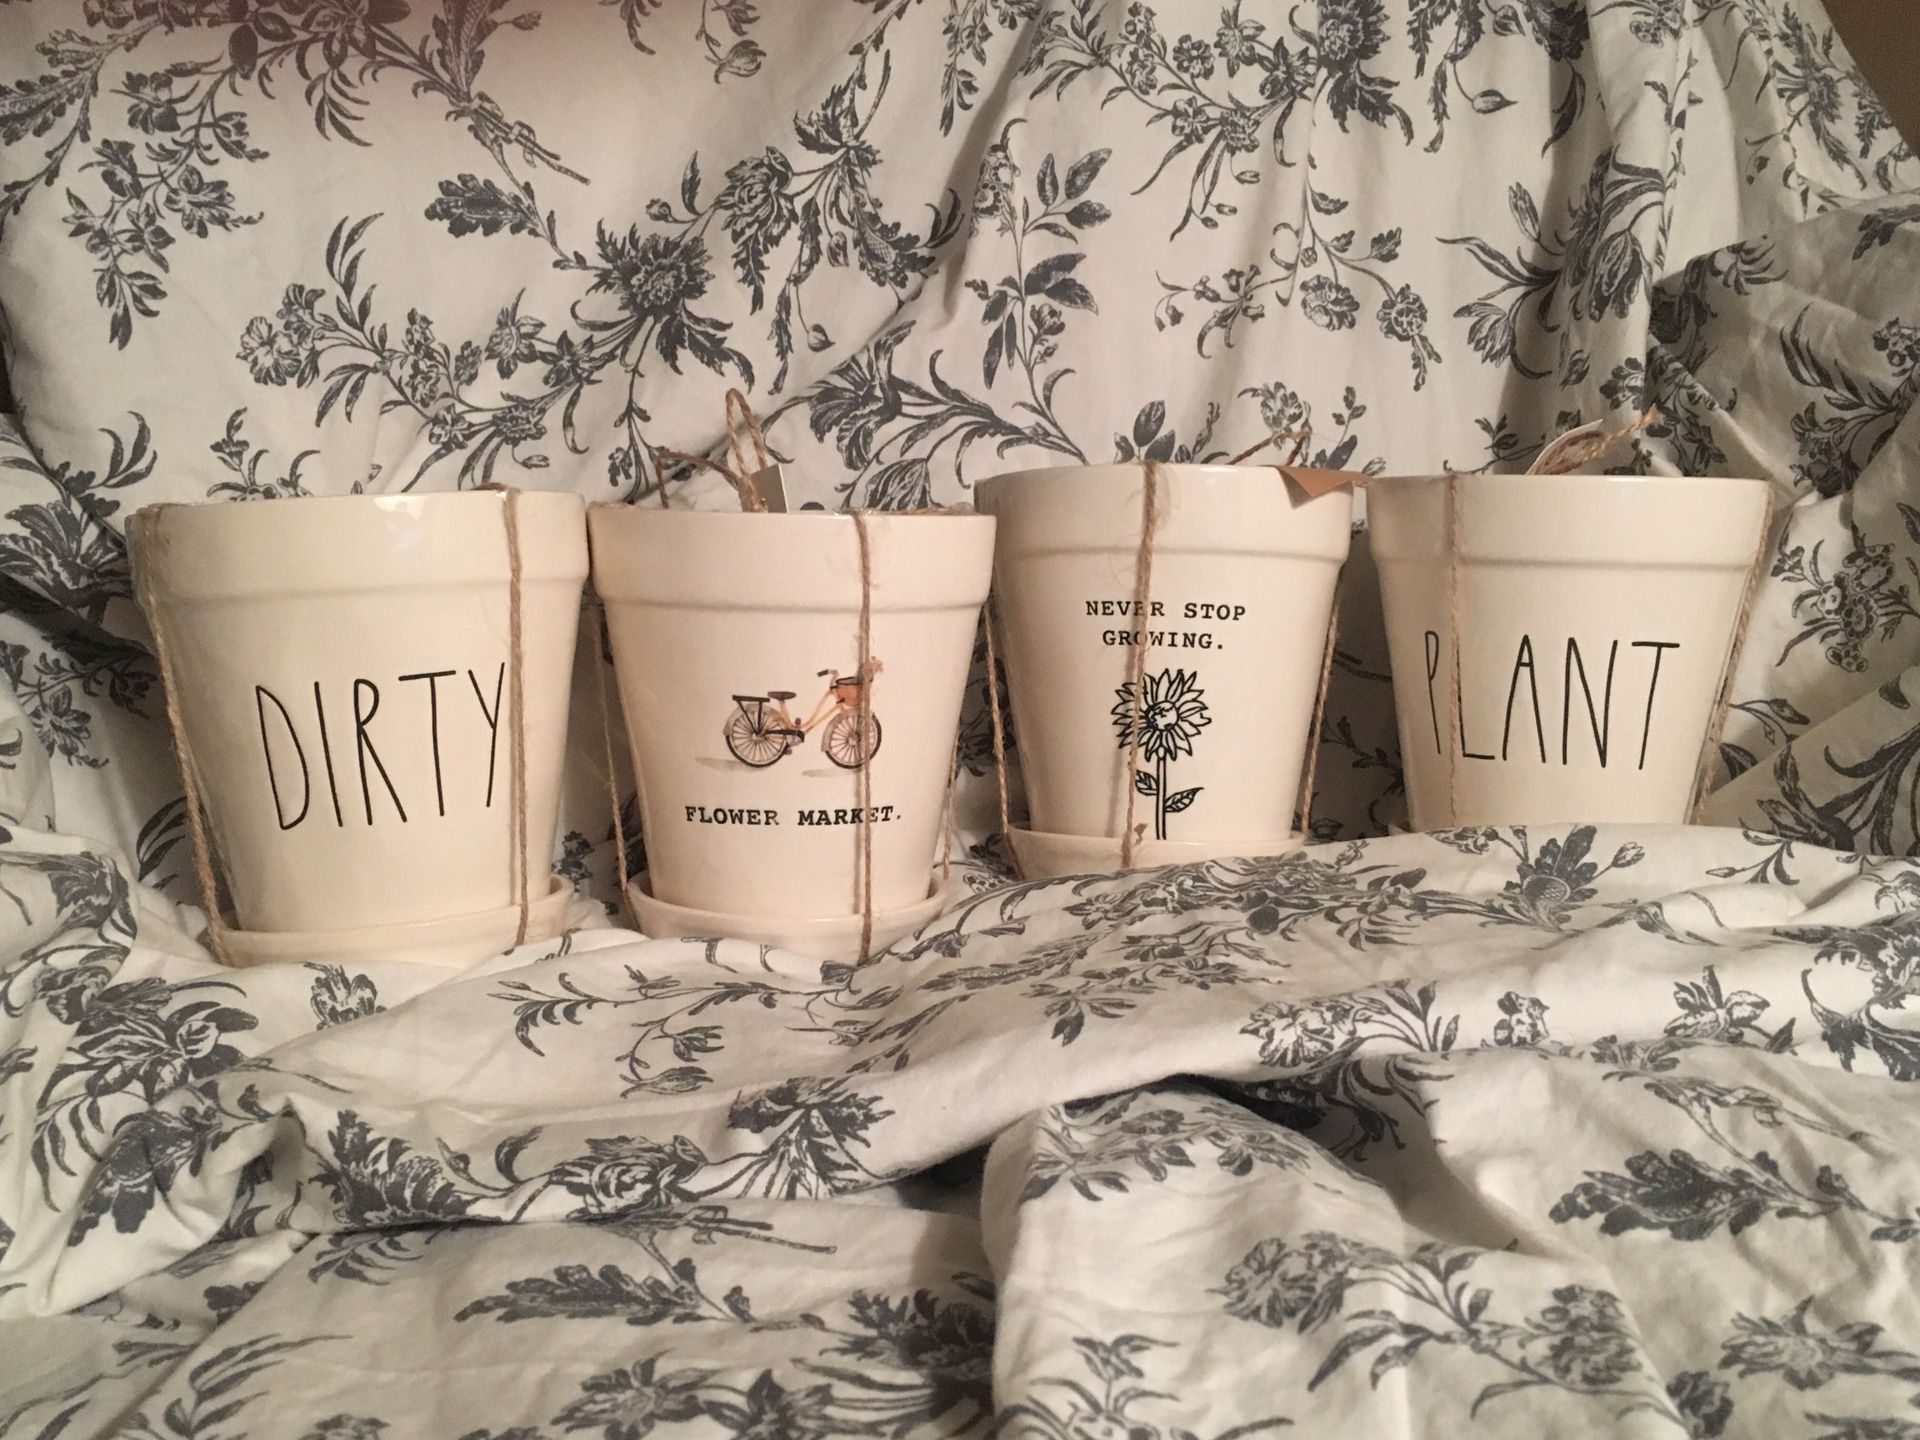 NEW Rae Dunn - “DIRTY, PLANT, Flower Market, Never Stop Growing” Small Planter Flower Pots